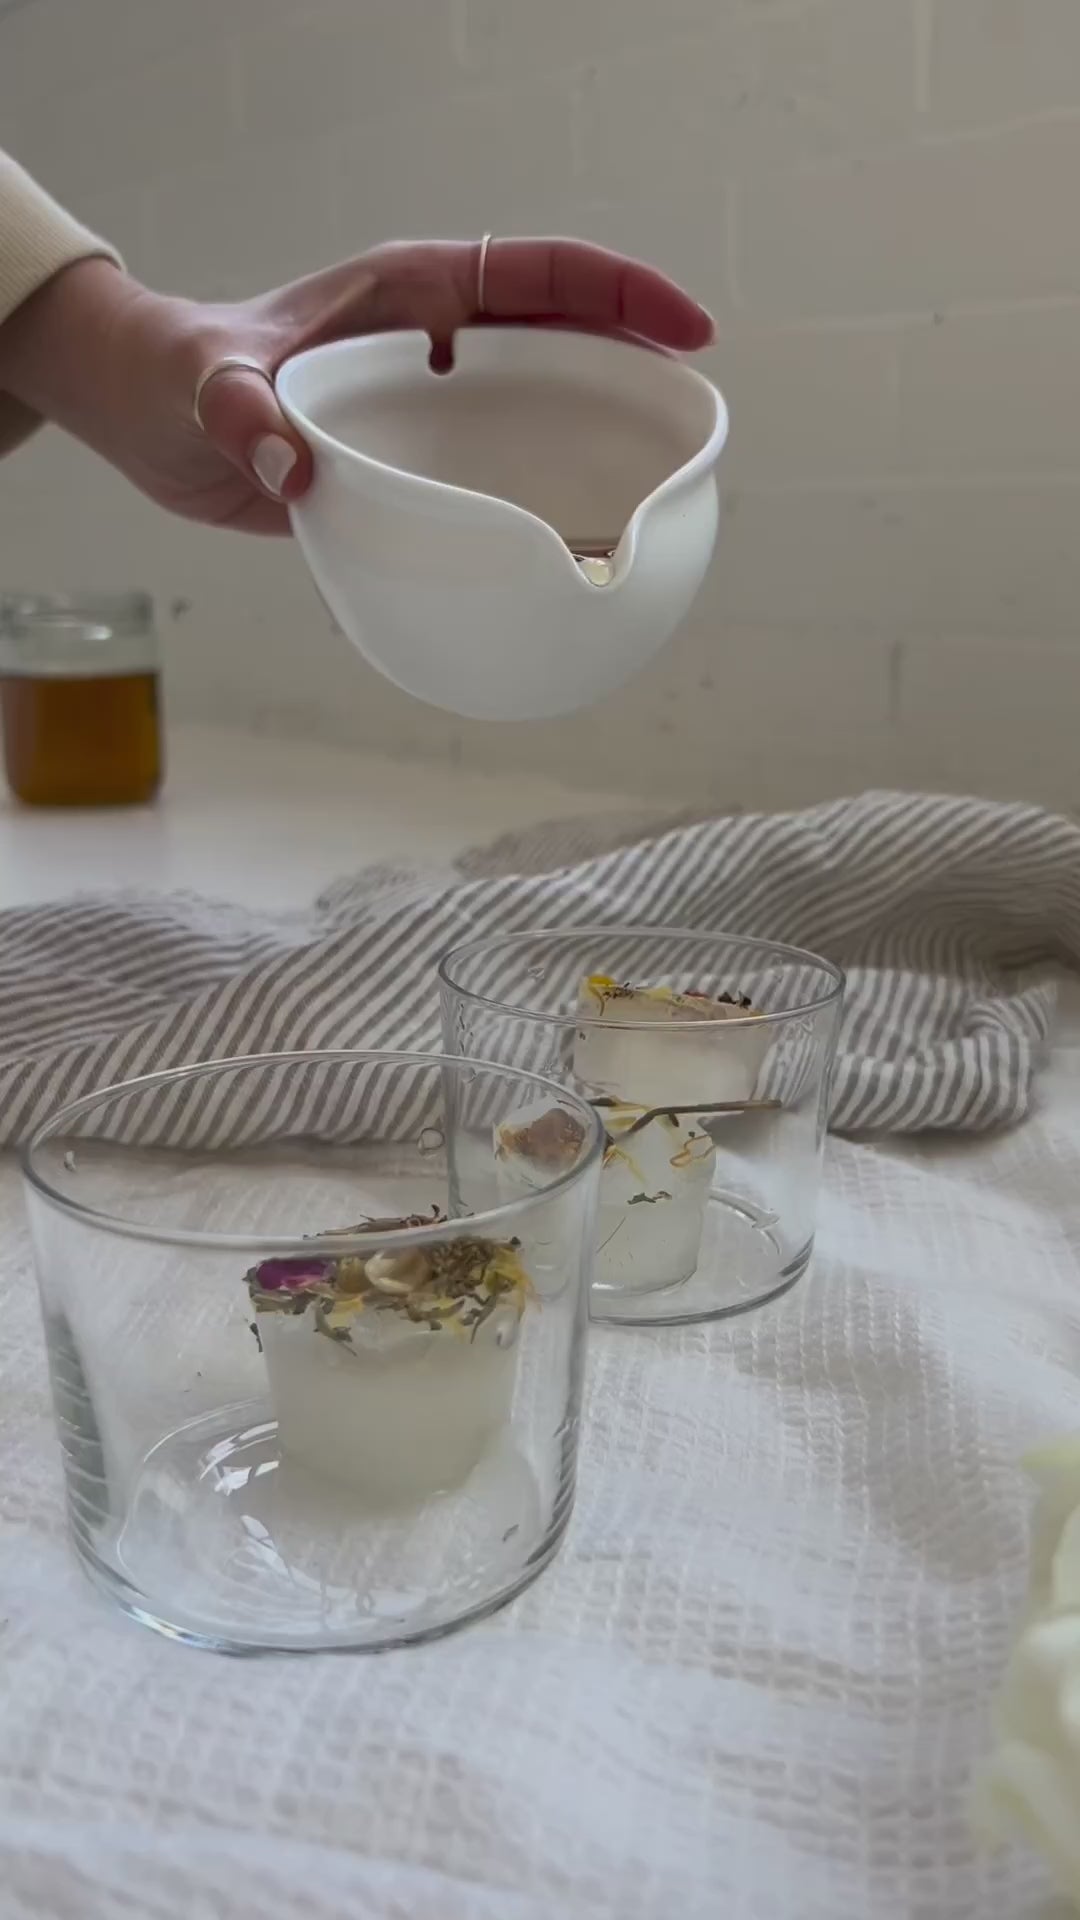 Woman's hand pouring tea into clear glasses with ice cubes